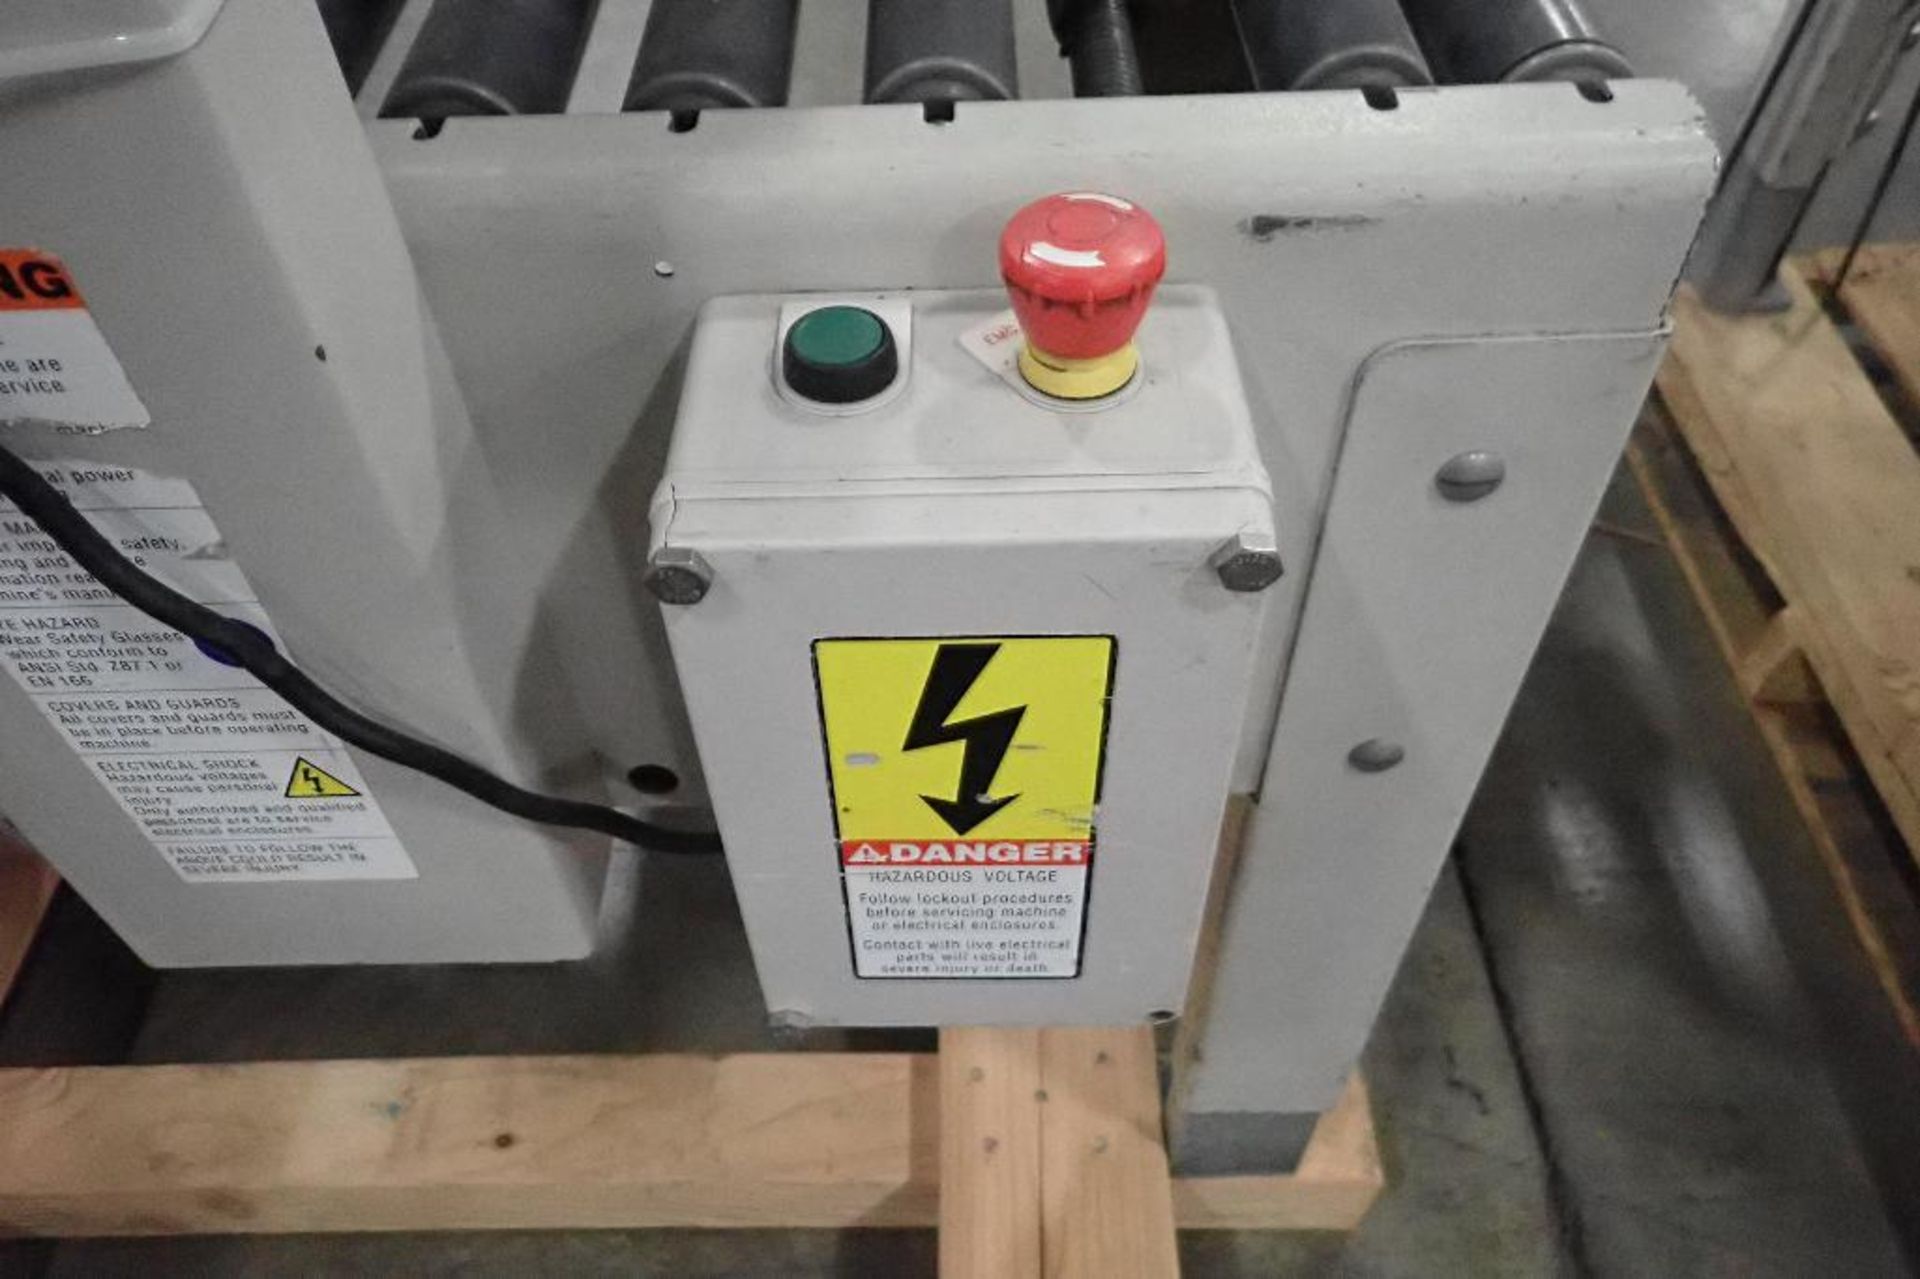 Interpack adjustable case sealer, Model USA2024SB, missing heads. **Rigging Fee: $50** (Located in 3 - Image 5 of 8